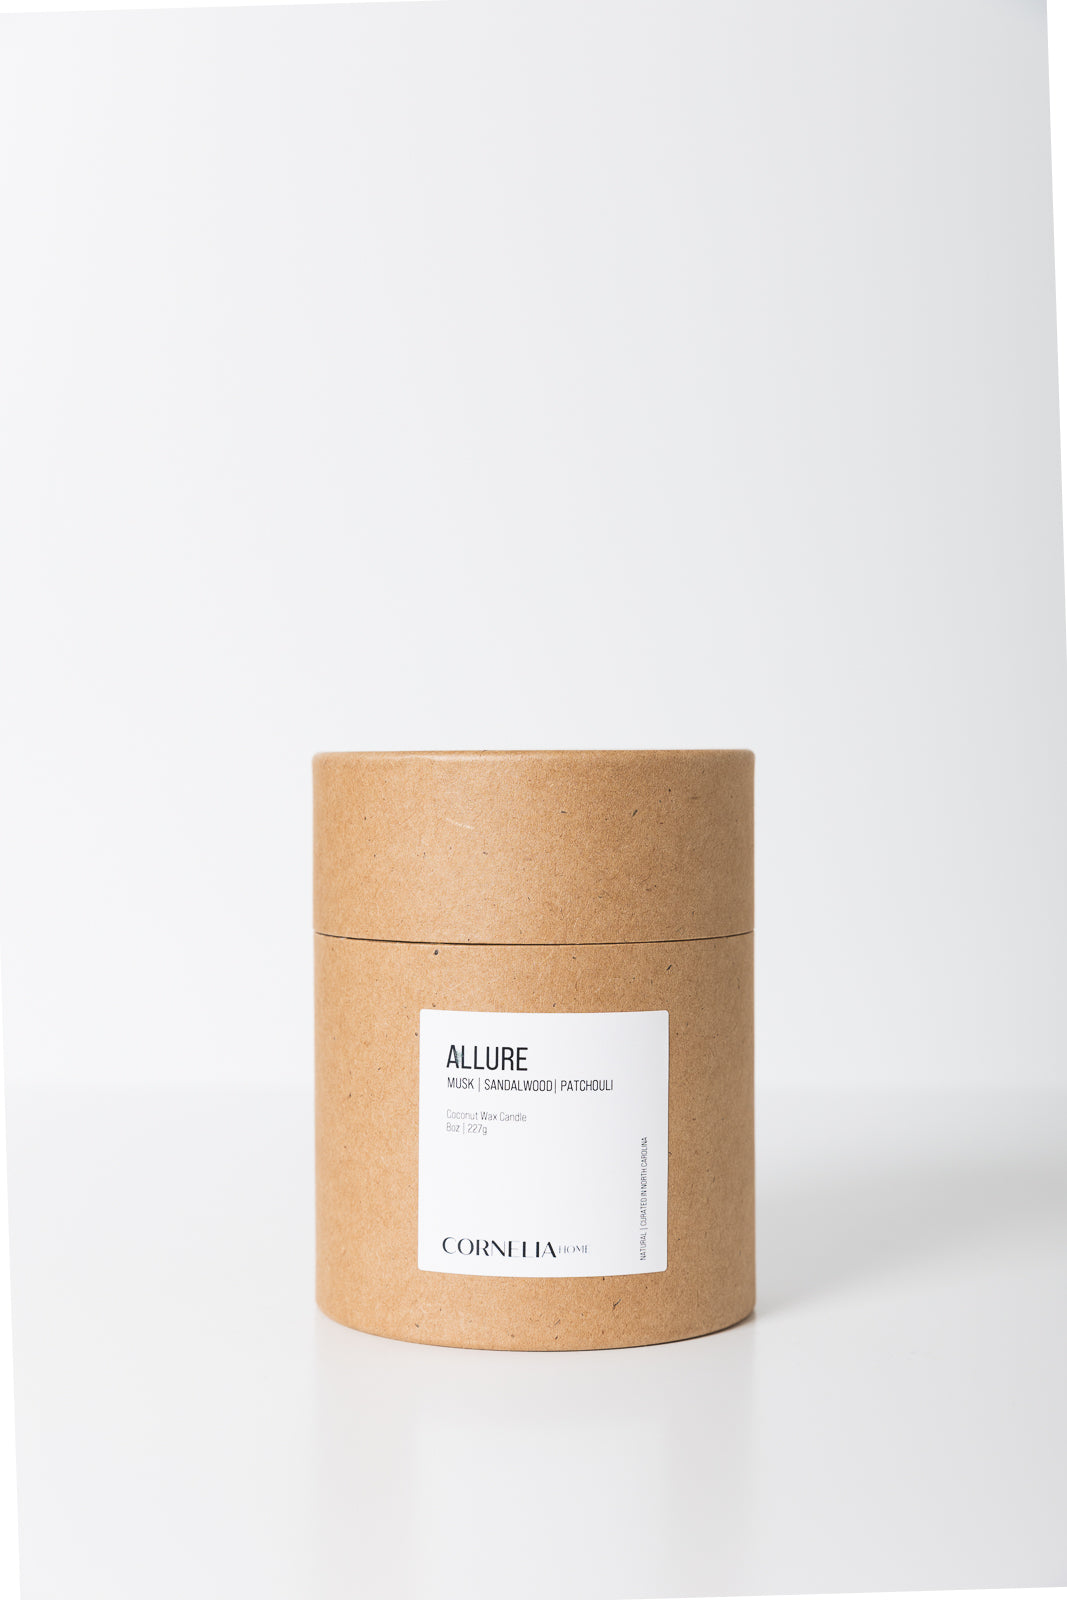 Allure - Candle